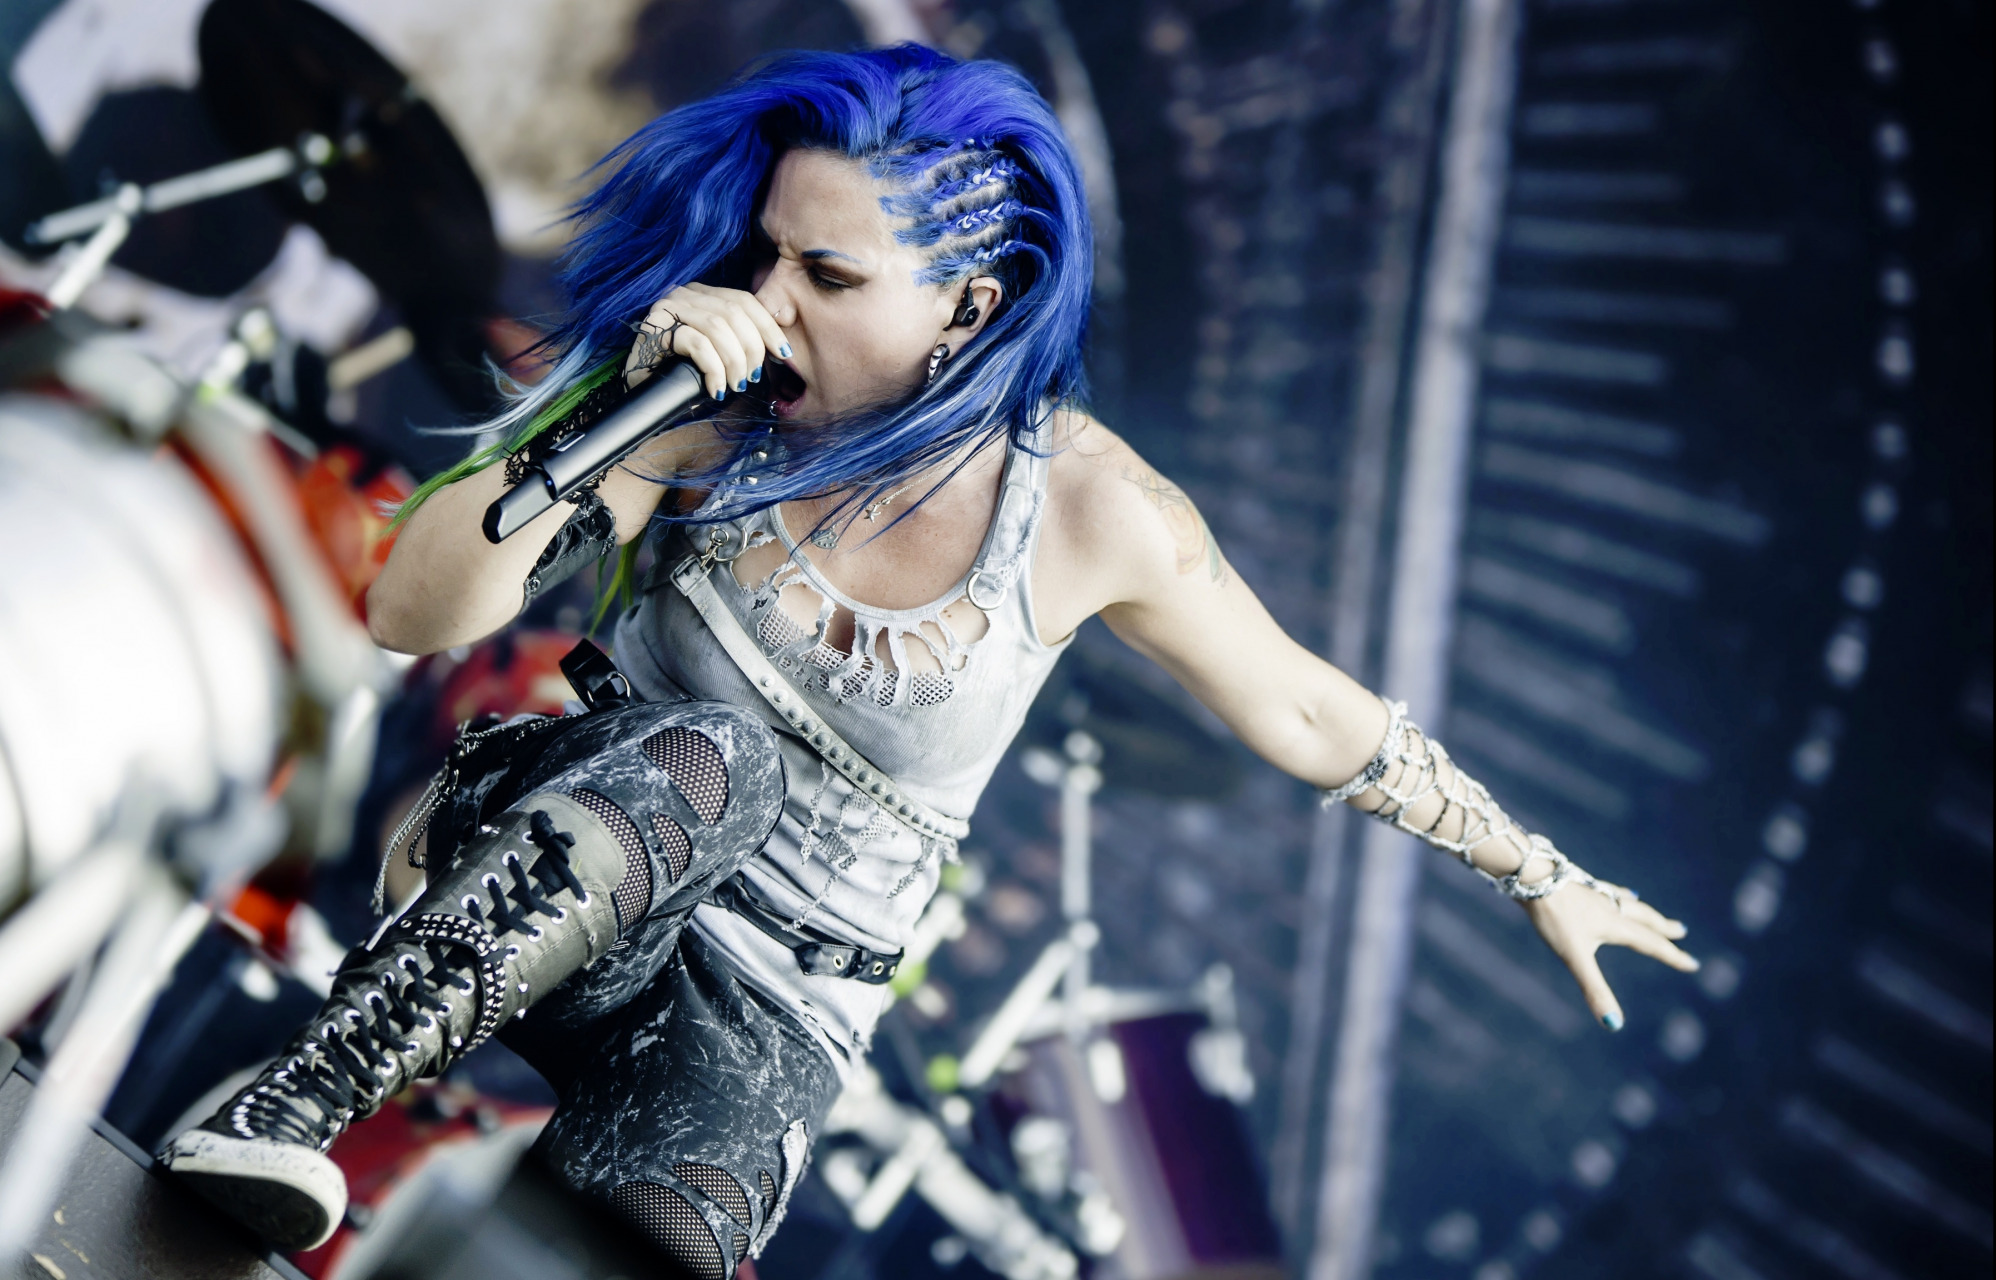 People 1996x1280 Alissa White-Gluz music heavy metal Arch Enemy women long boots dyed eyebrows dyed hair colored nails closed eyes singer